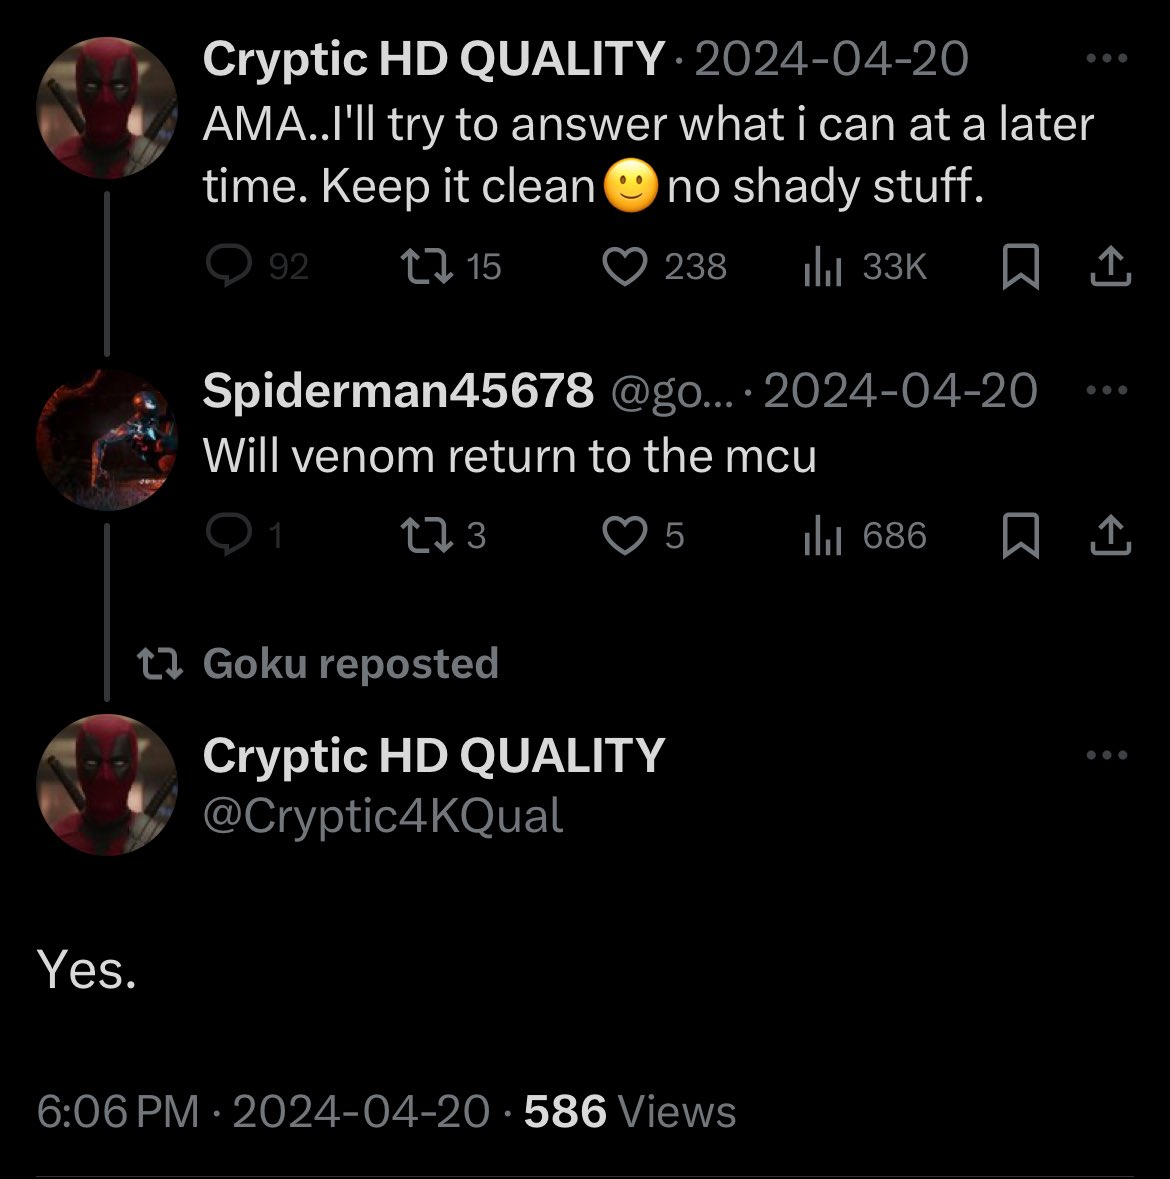 Fucking called it. The SSU is ending with Venom returning to the MCU